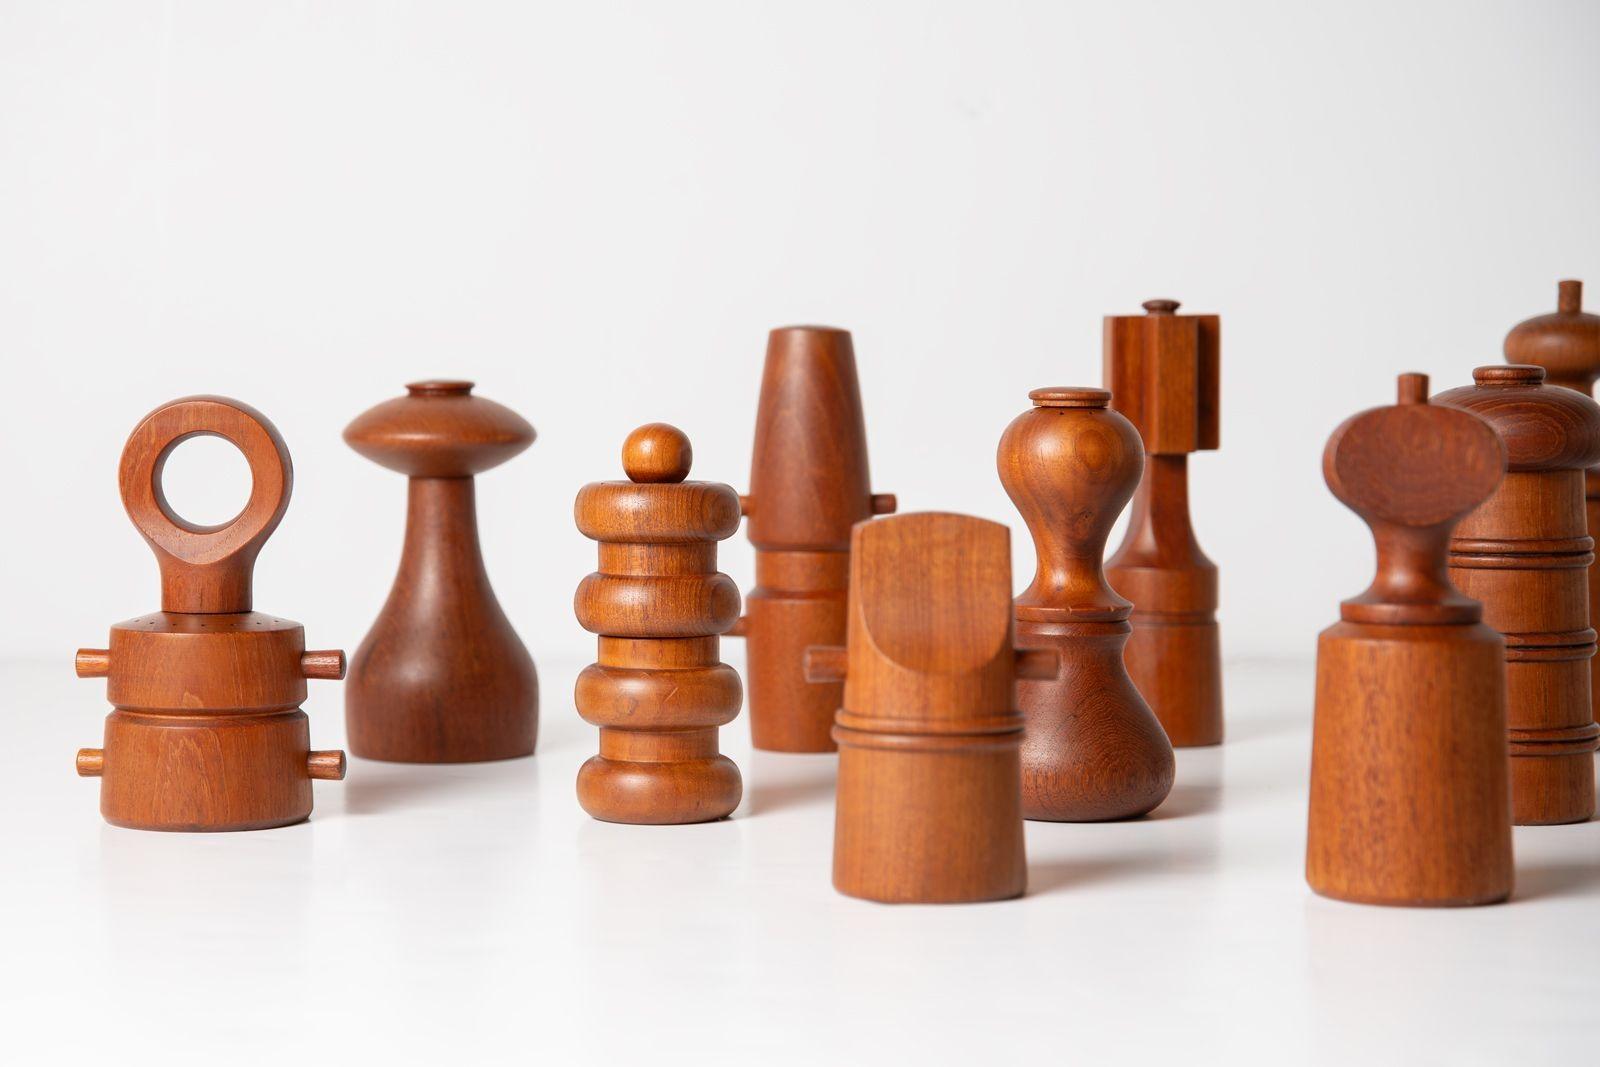 Danish Dansk Pepper Mills by Jens Quistgaard - A Curated Collection of 17 For Sale